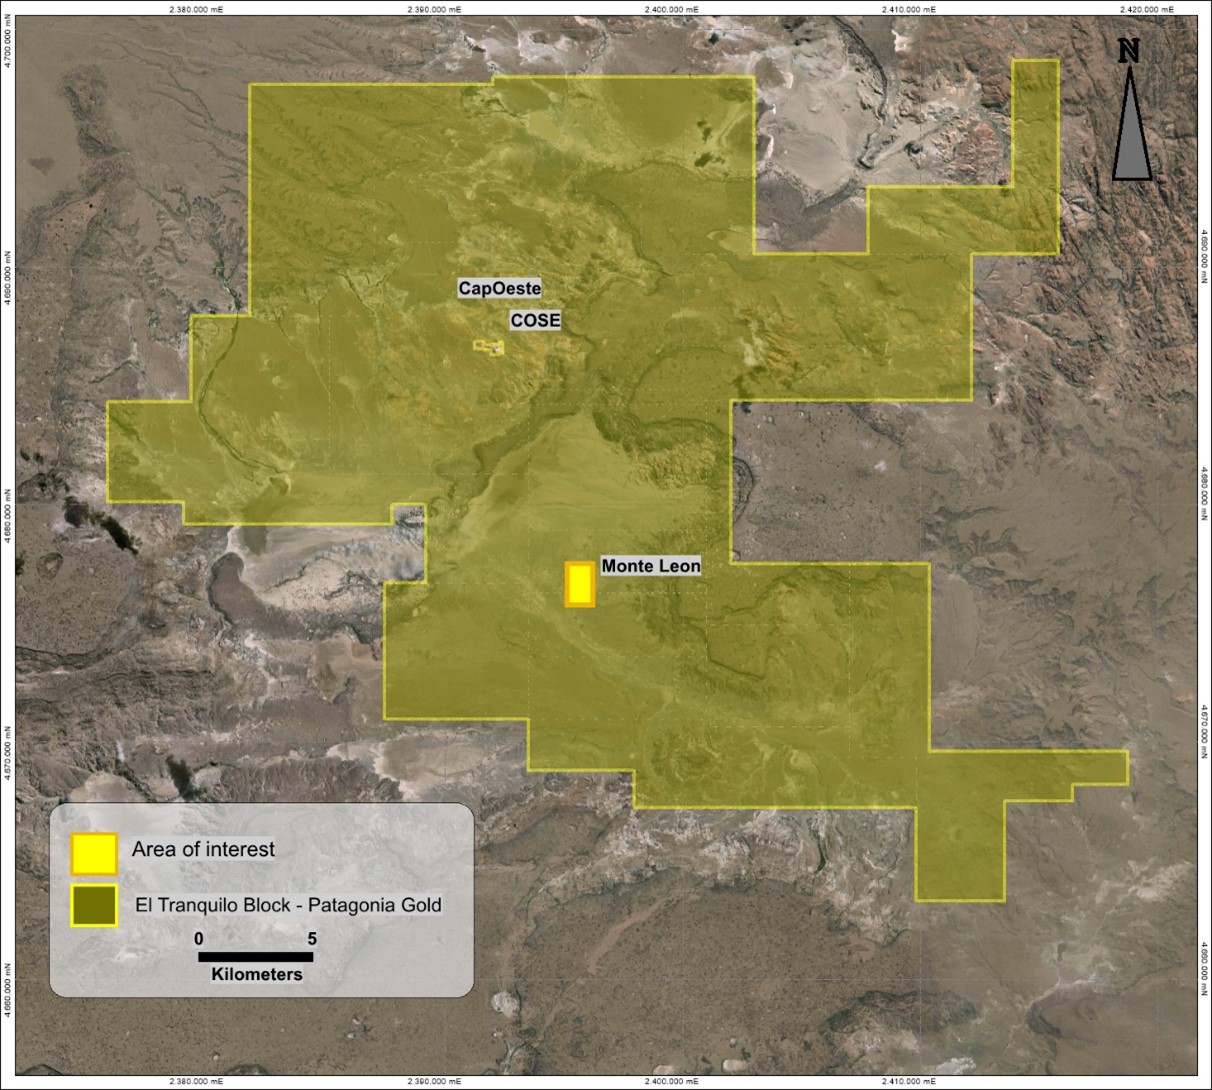 Patagonia Gold Enters Into Drilling Agreement at Monte Leon: Patagonia Gold Enters Into Drilling Agreement at Monte Leon